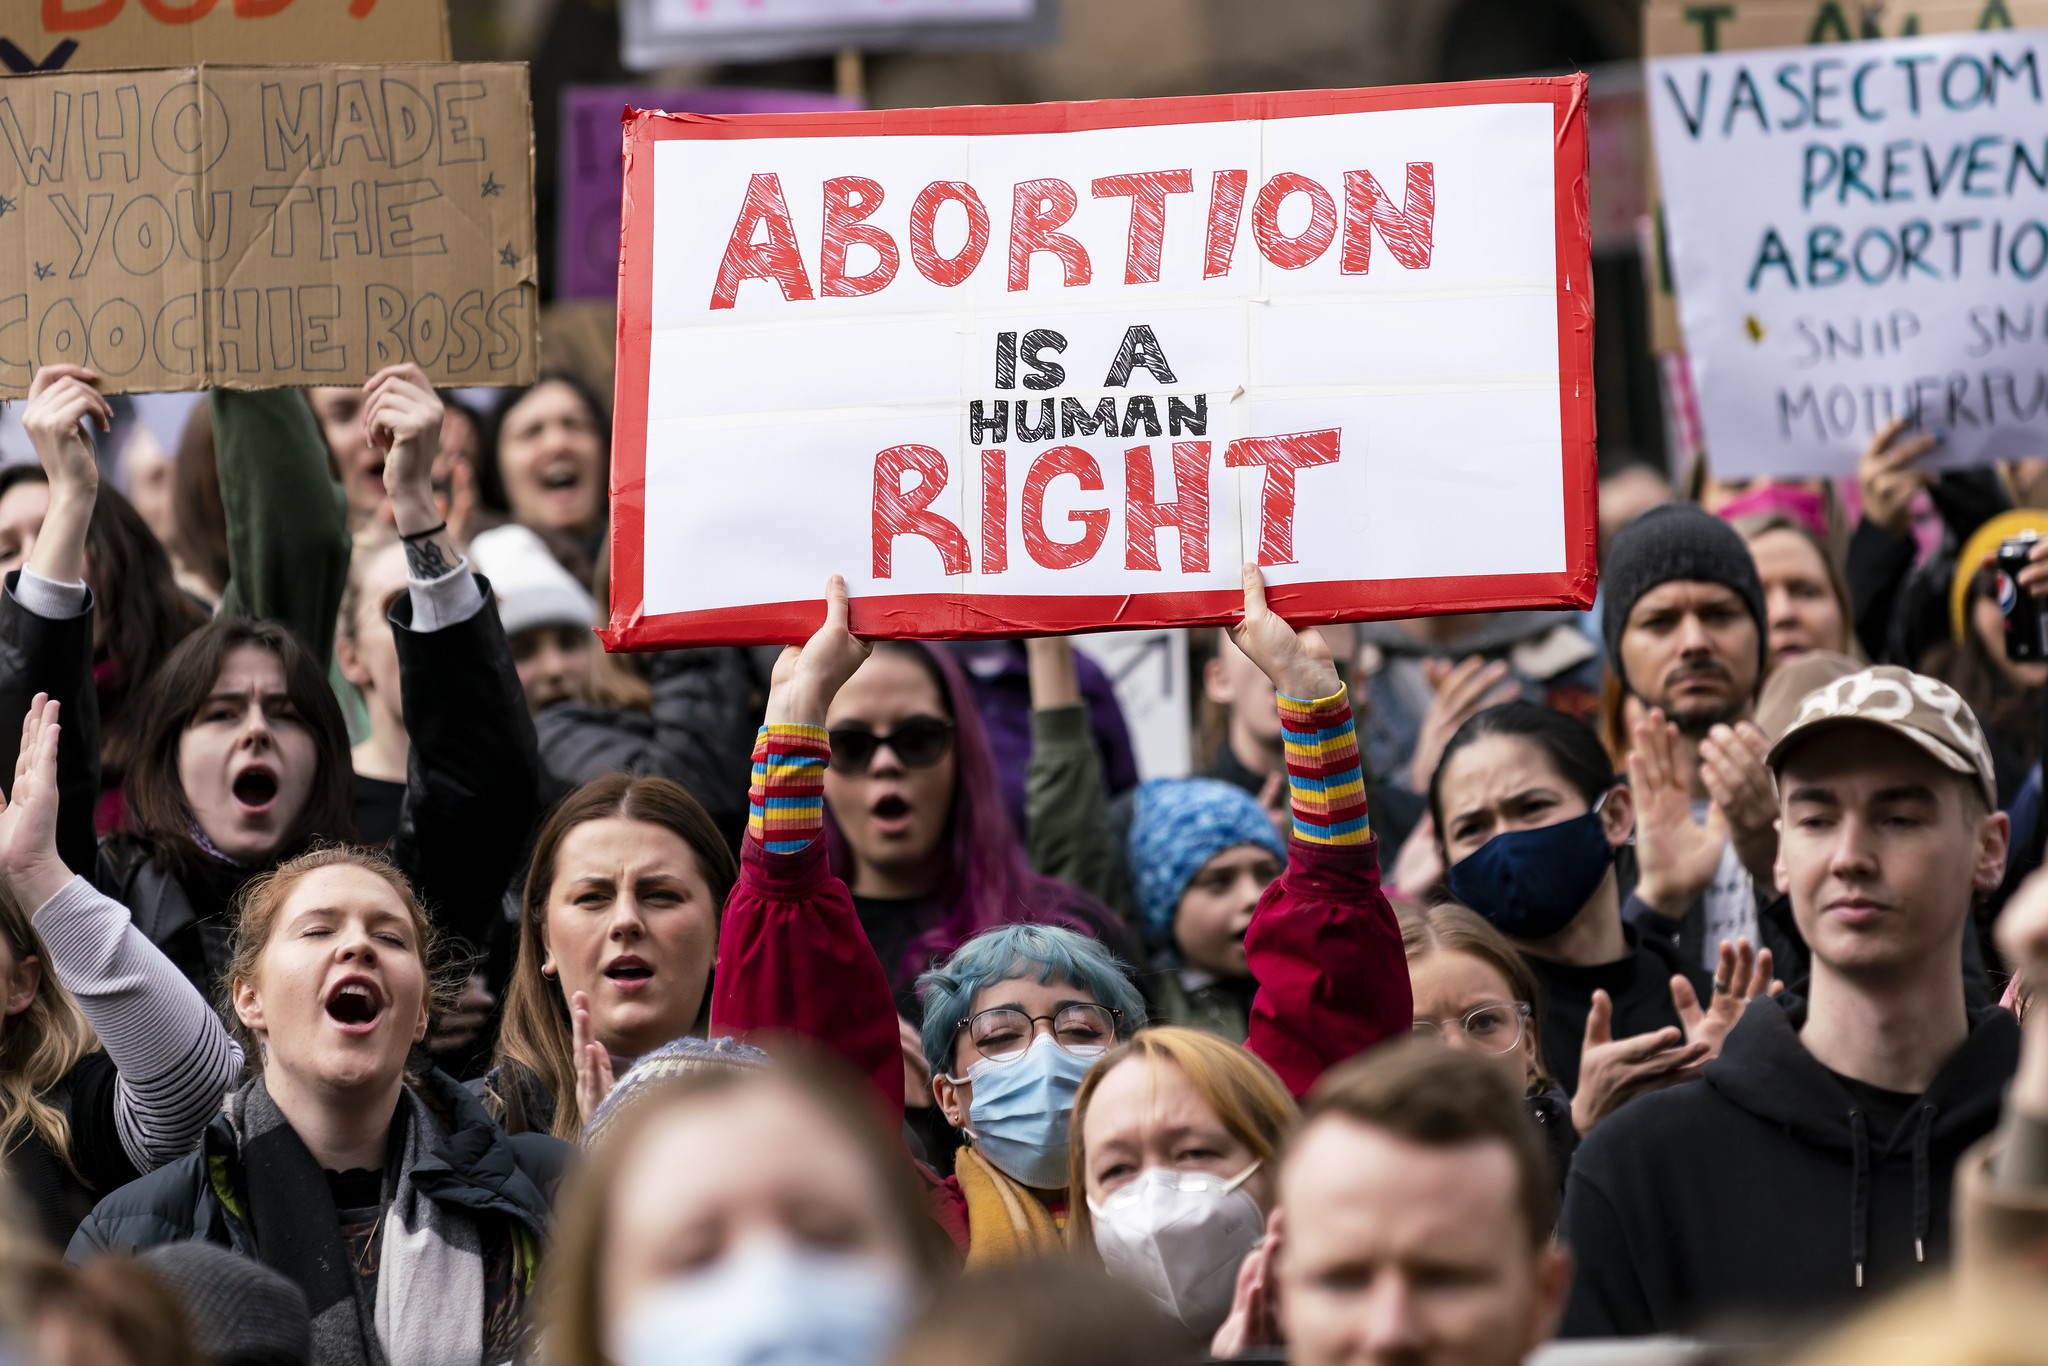 An image from an abortion rights protest. The camera is focused on one person who is wearing a rainbow striped long sleeve top and holding a sign which reads in red 'abortion is a human right'